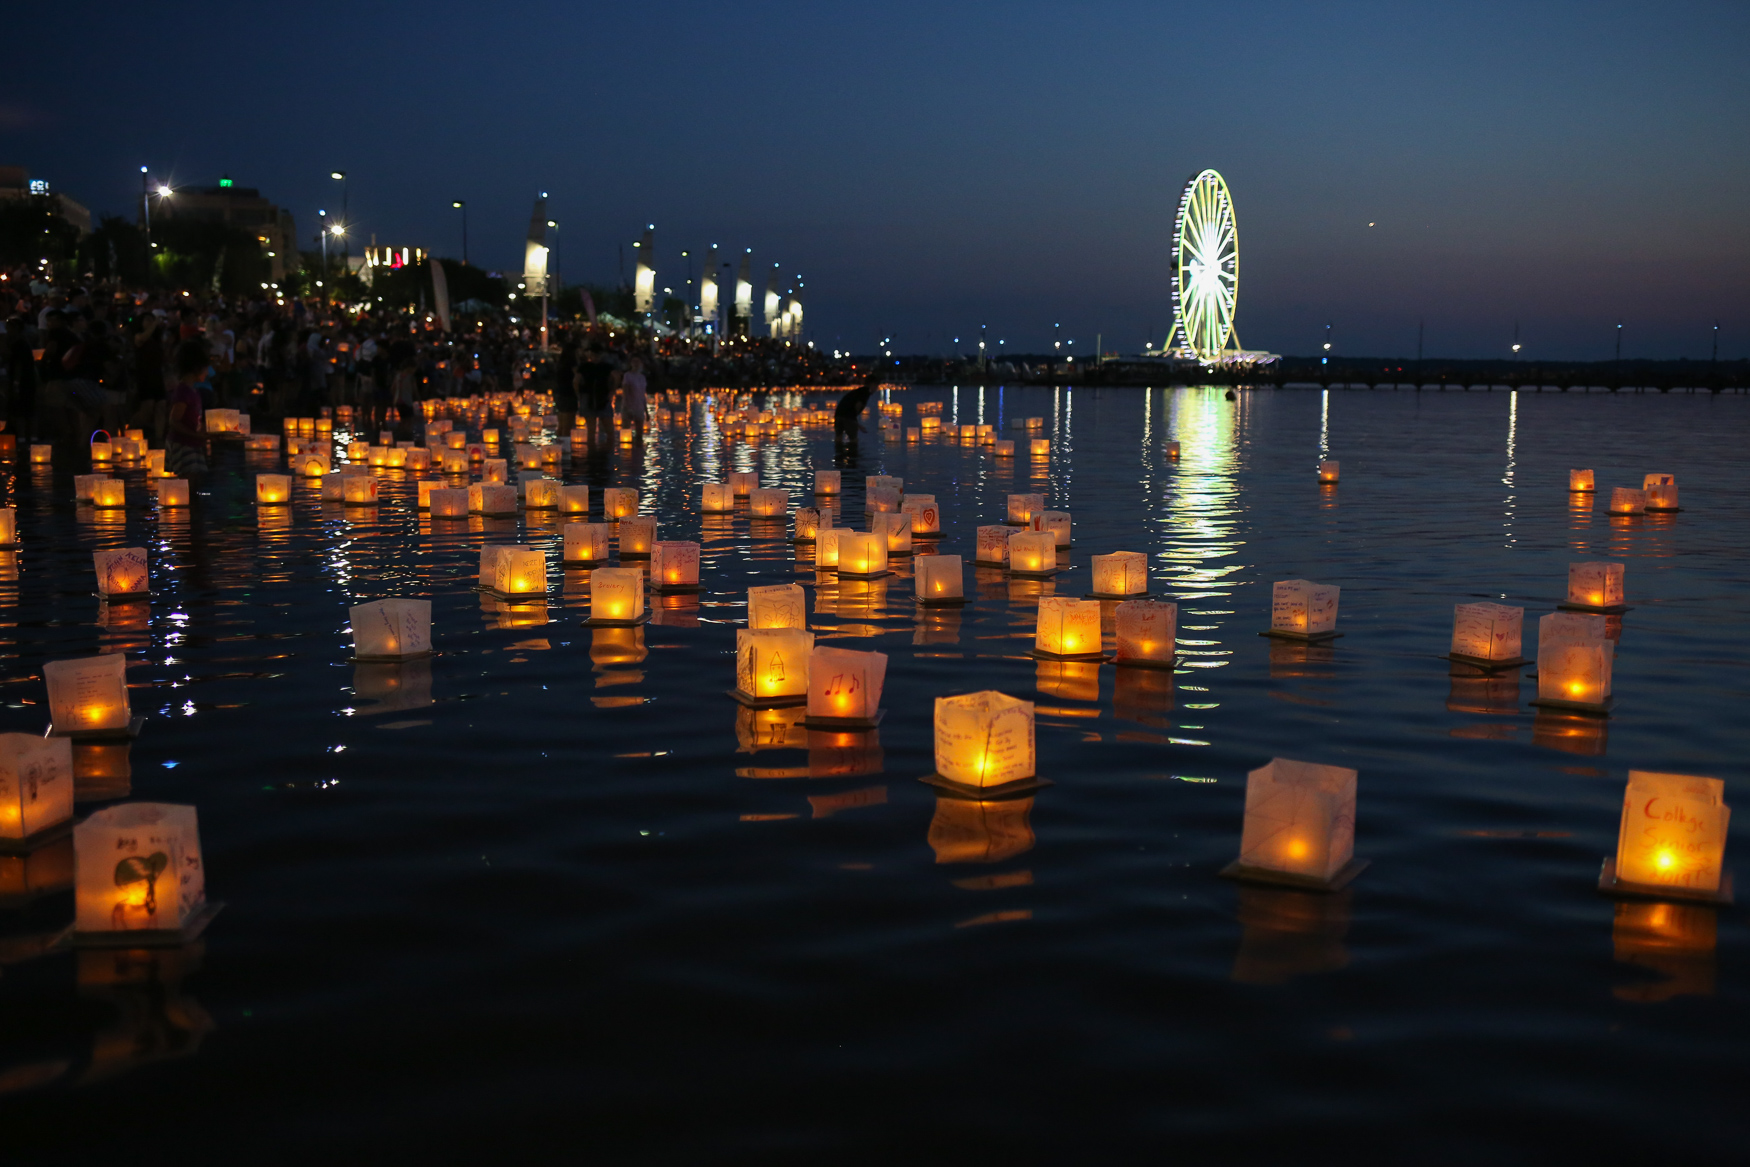 National Harbor was illuminated by lanterns and it was pretty magical